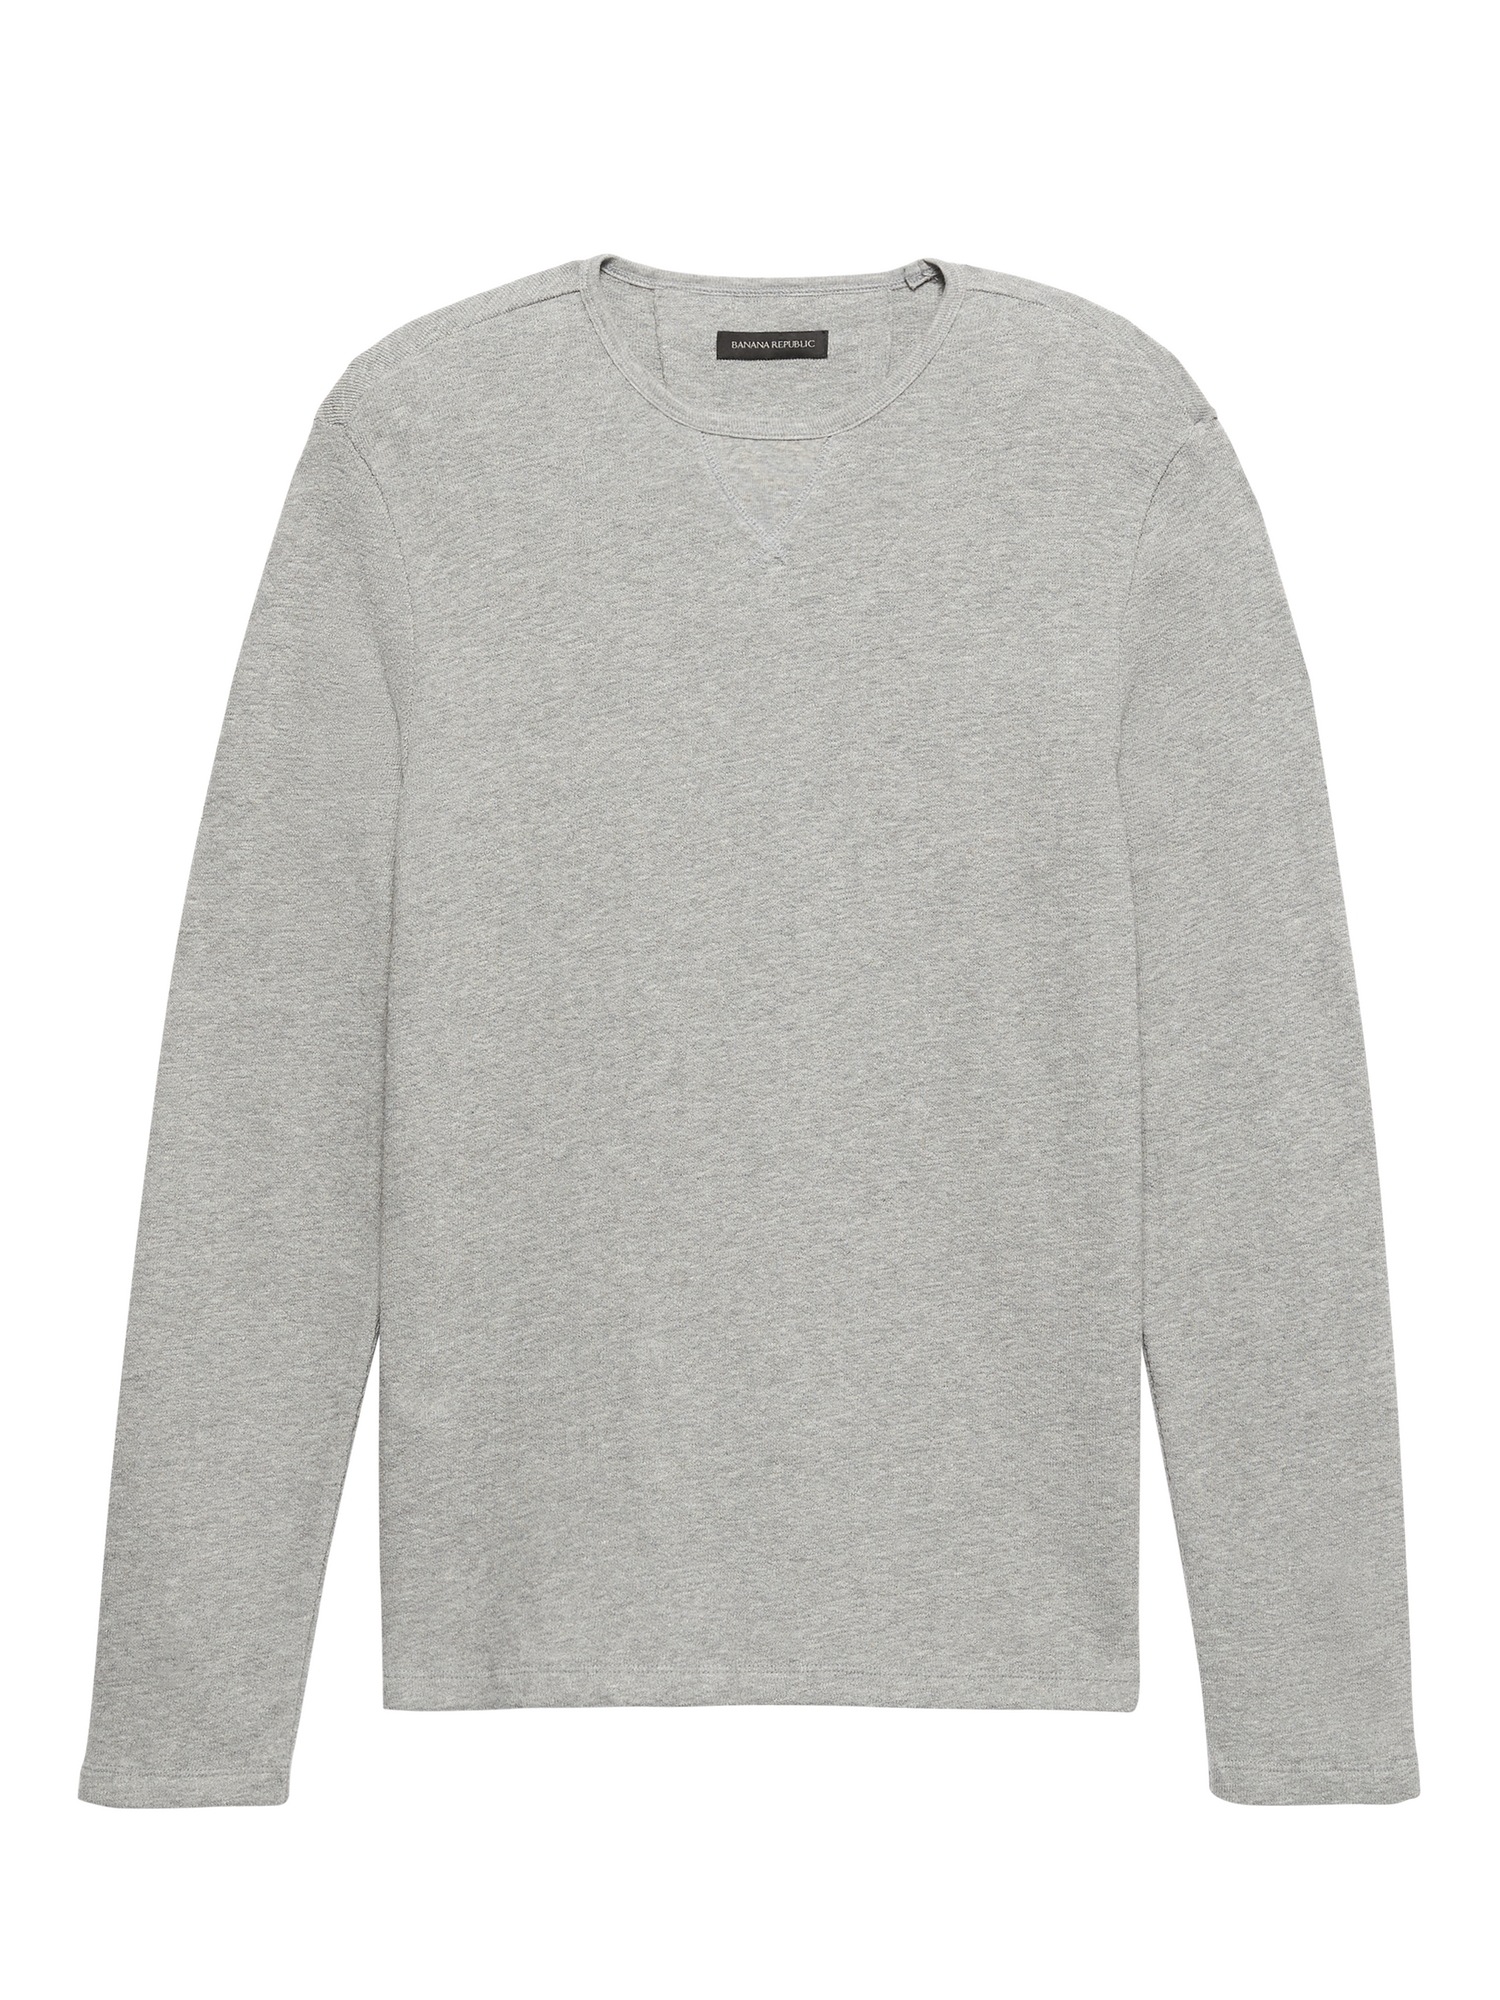 Heritage Long-Sleeve Textured T-Shirt